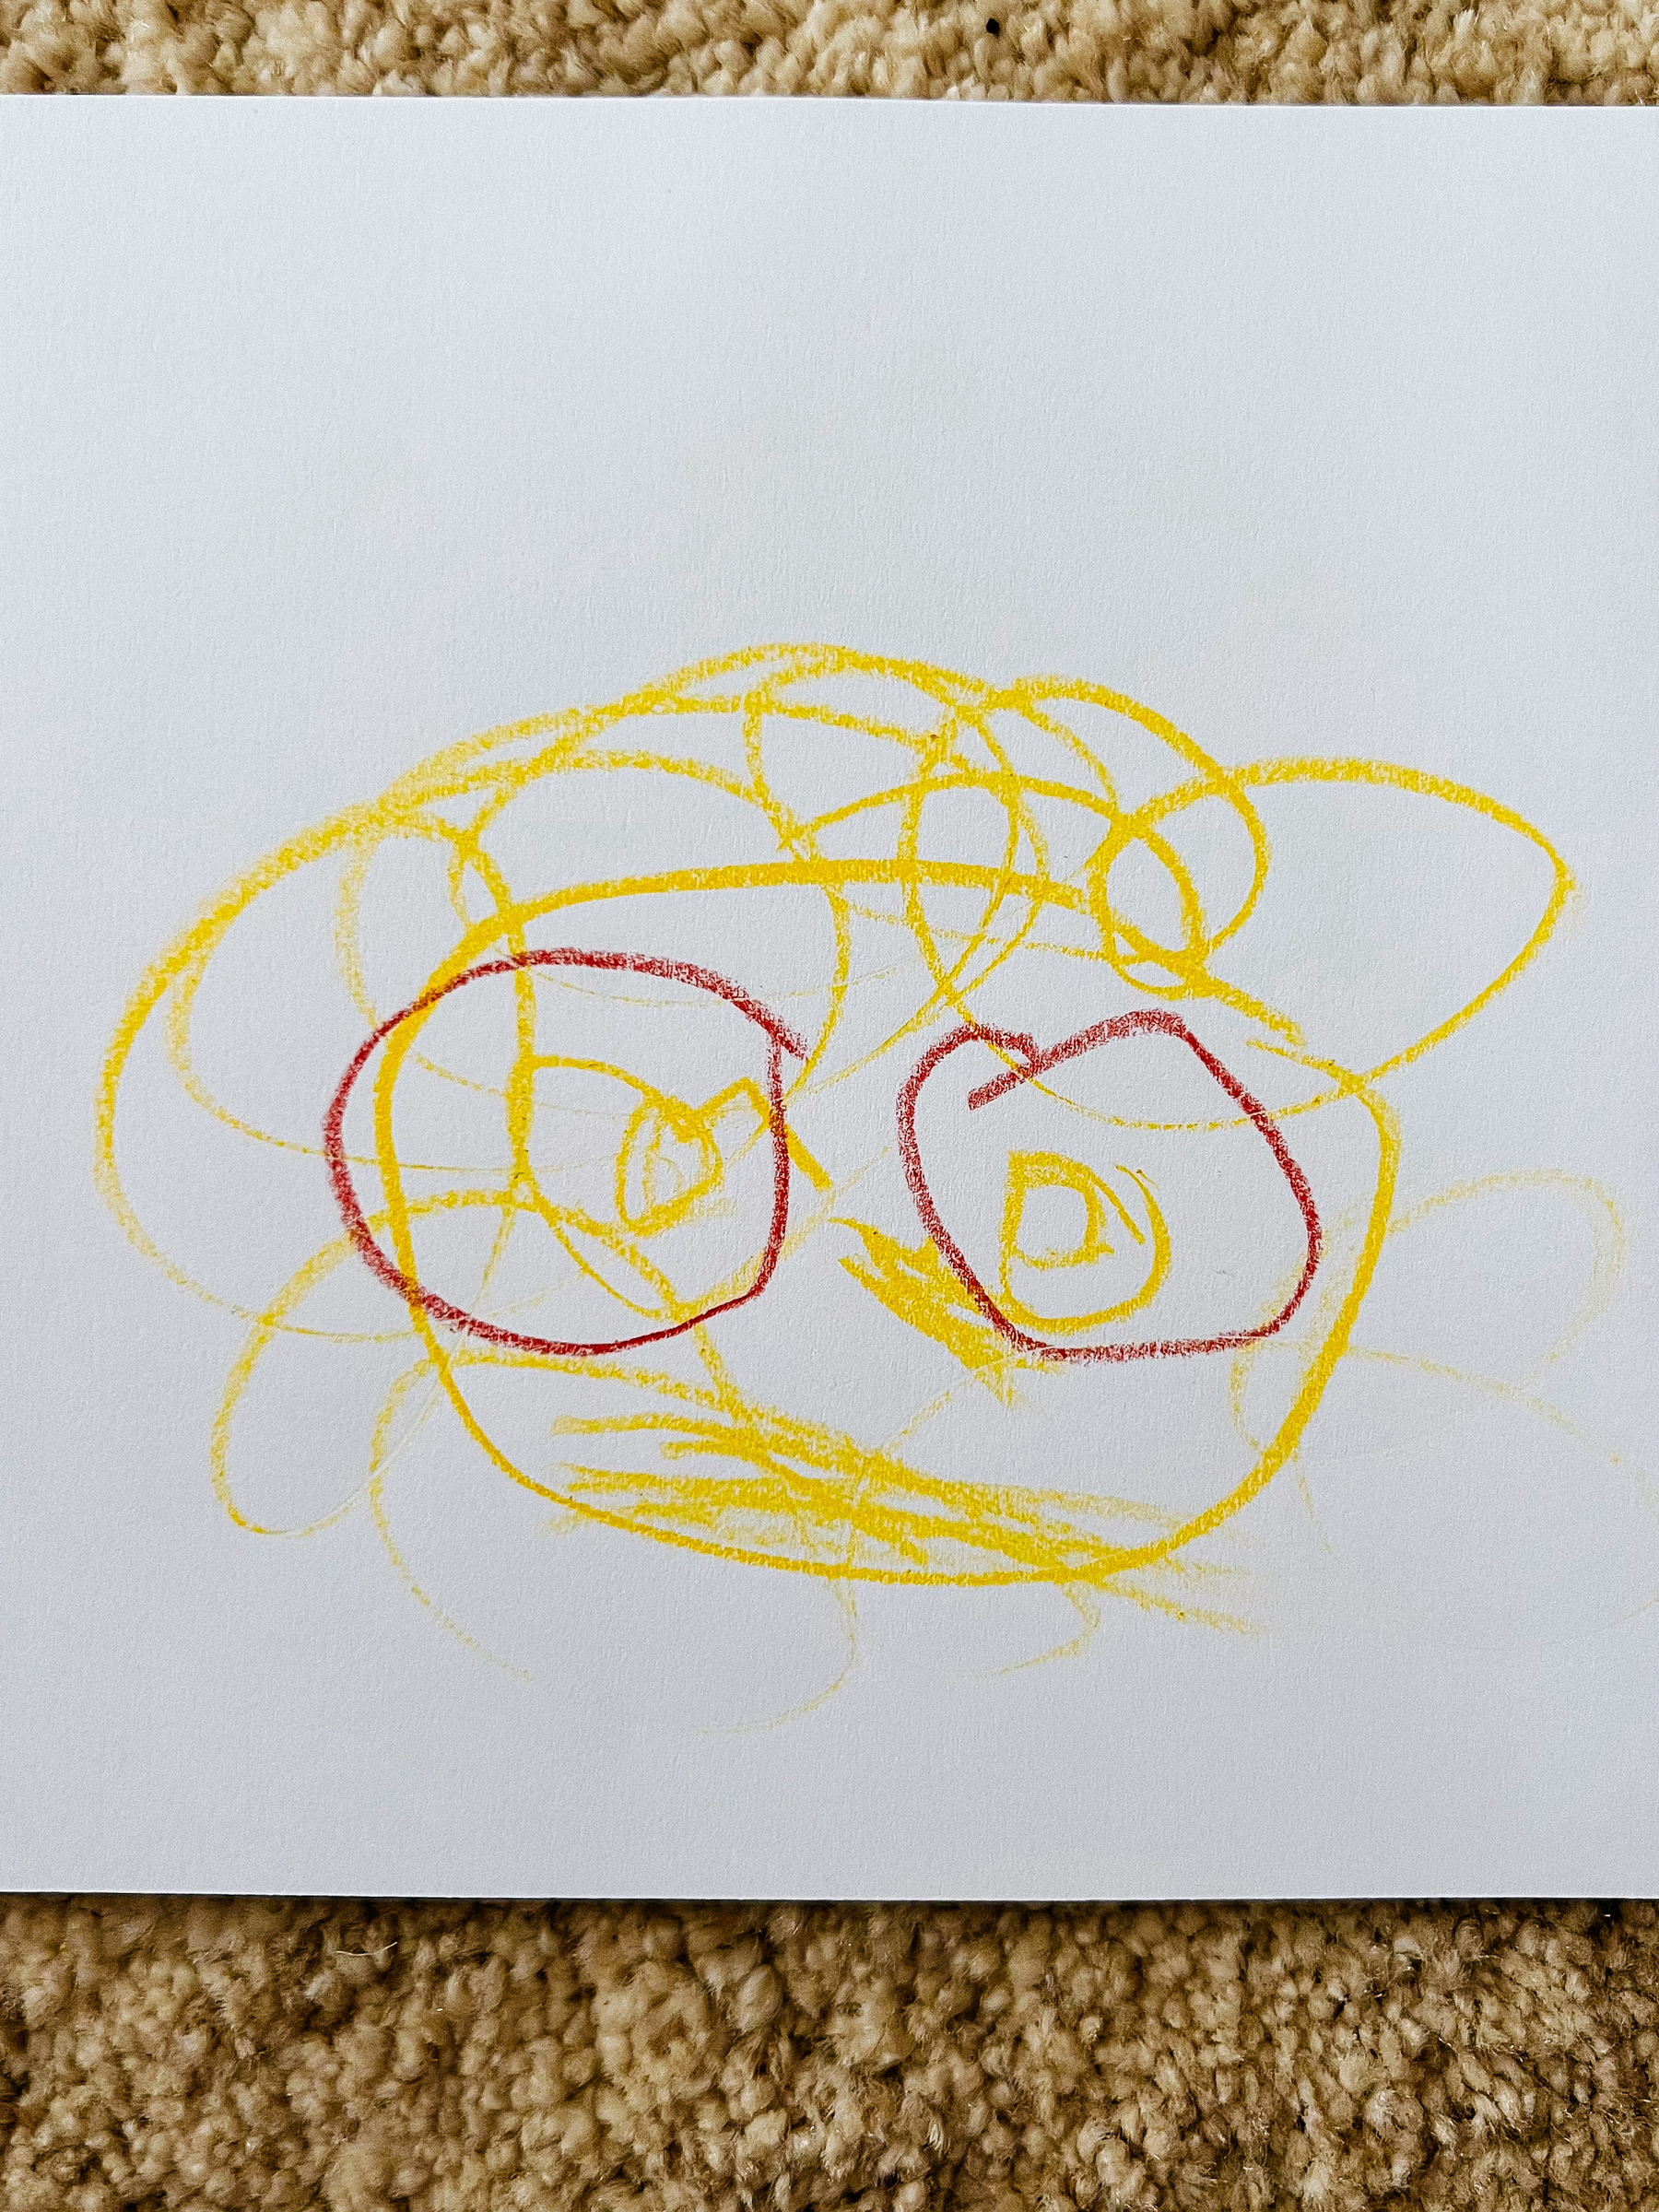 A kid’s drawing, very clearly showing an extremely handsome man, with crazy hair and big beard. He has a pair of red glasses. 